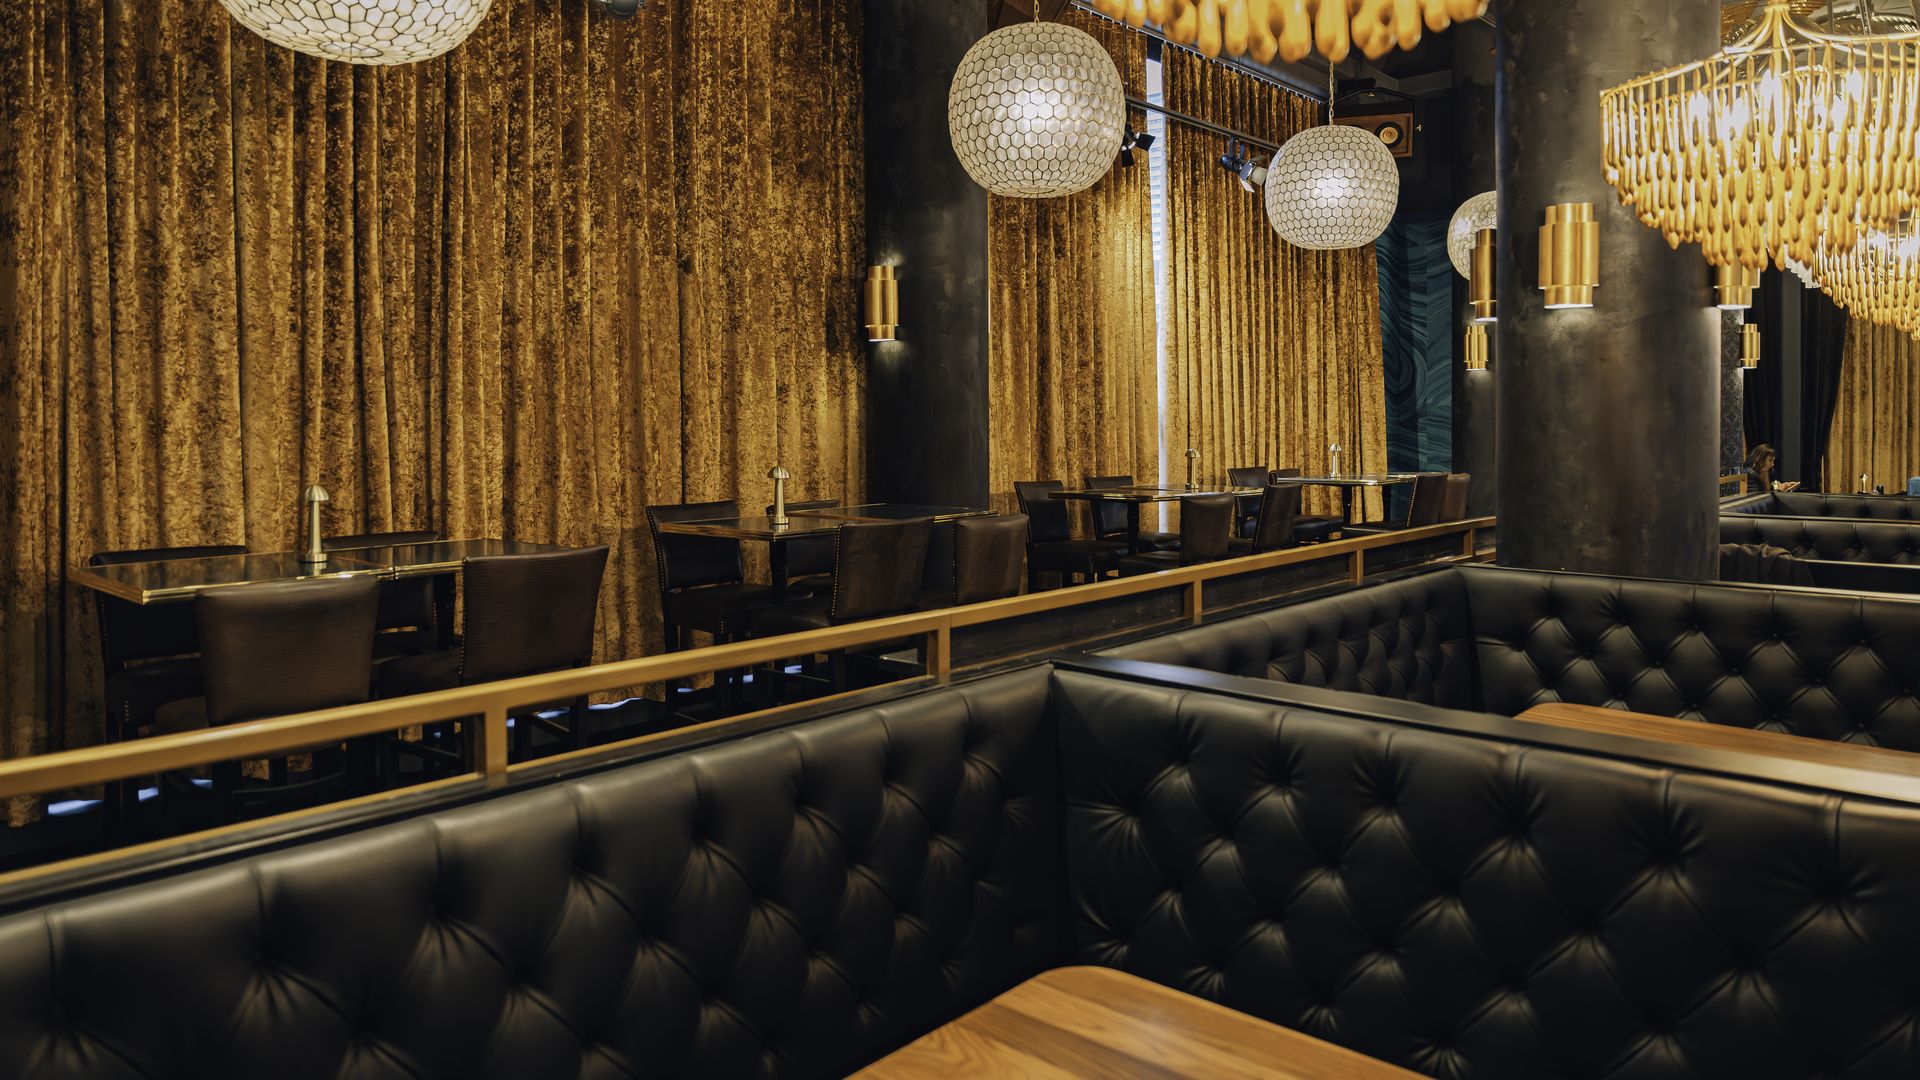 The interior of Grace by Nia, a supper club/speakeasy/live music venue in the Seaport. There are large leather booths and chairs, chandeliers, gilded light fixtures and curtains.